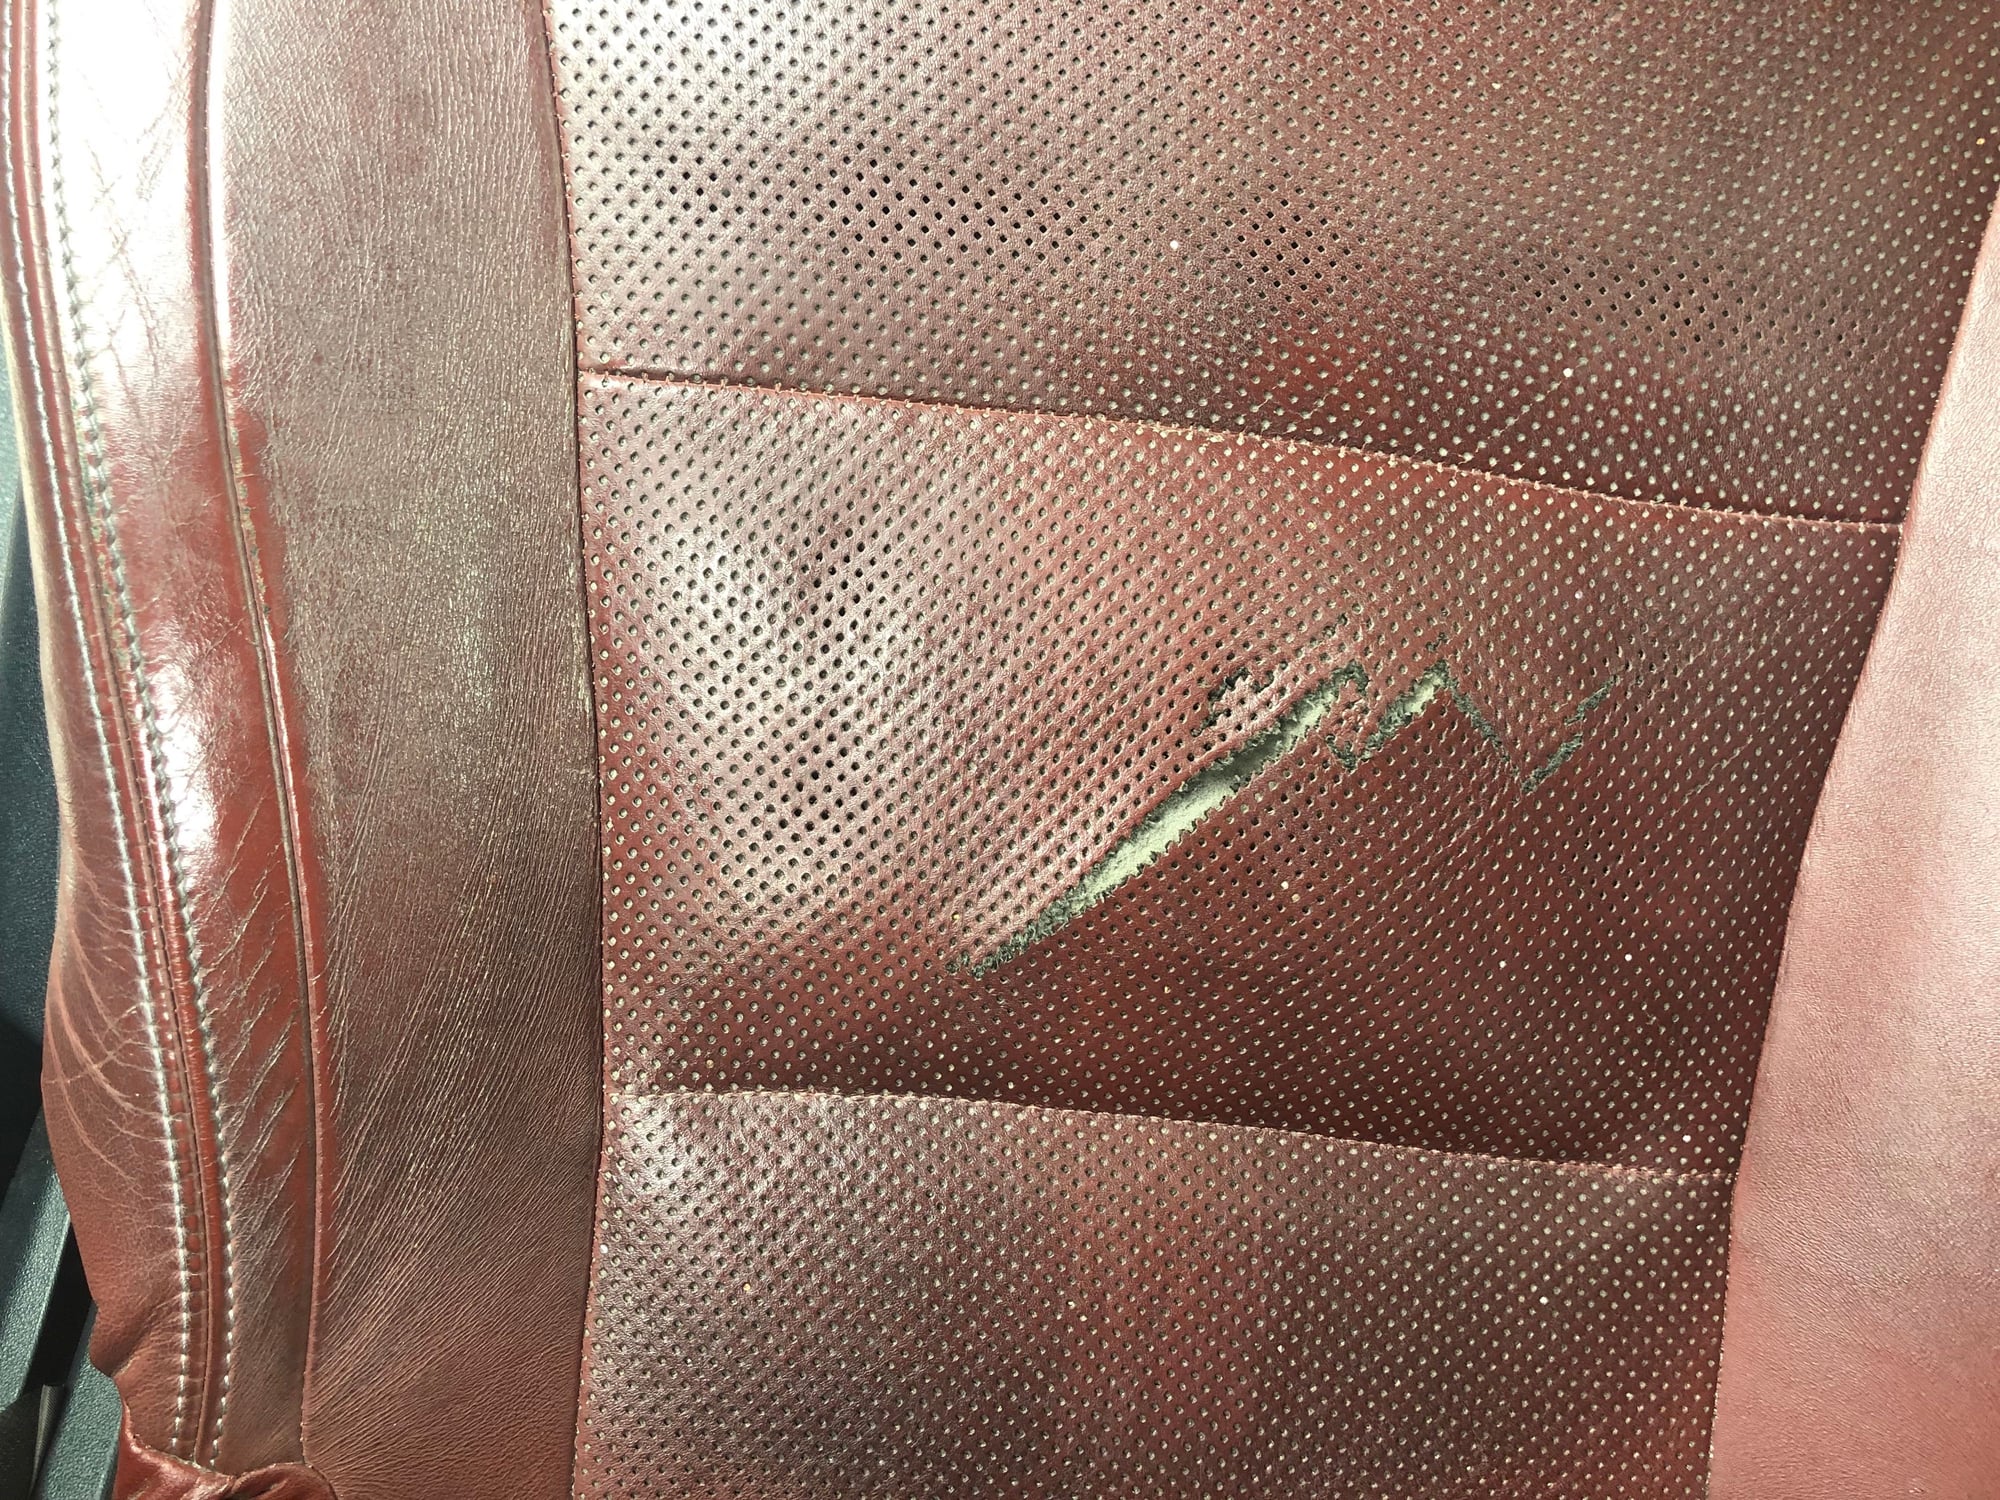 Advice on Leather Seat Repair